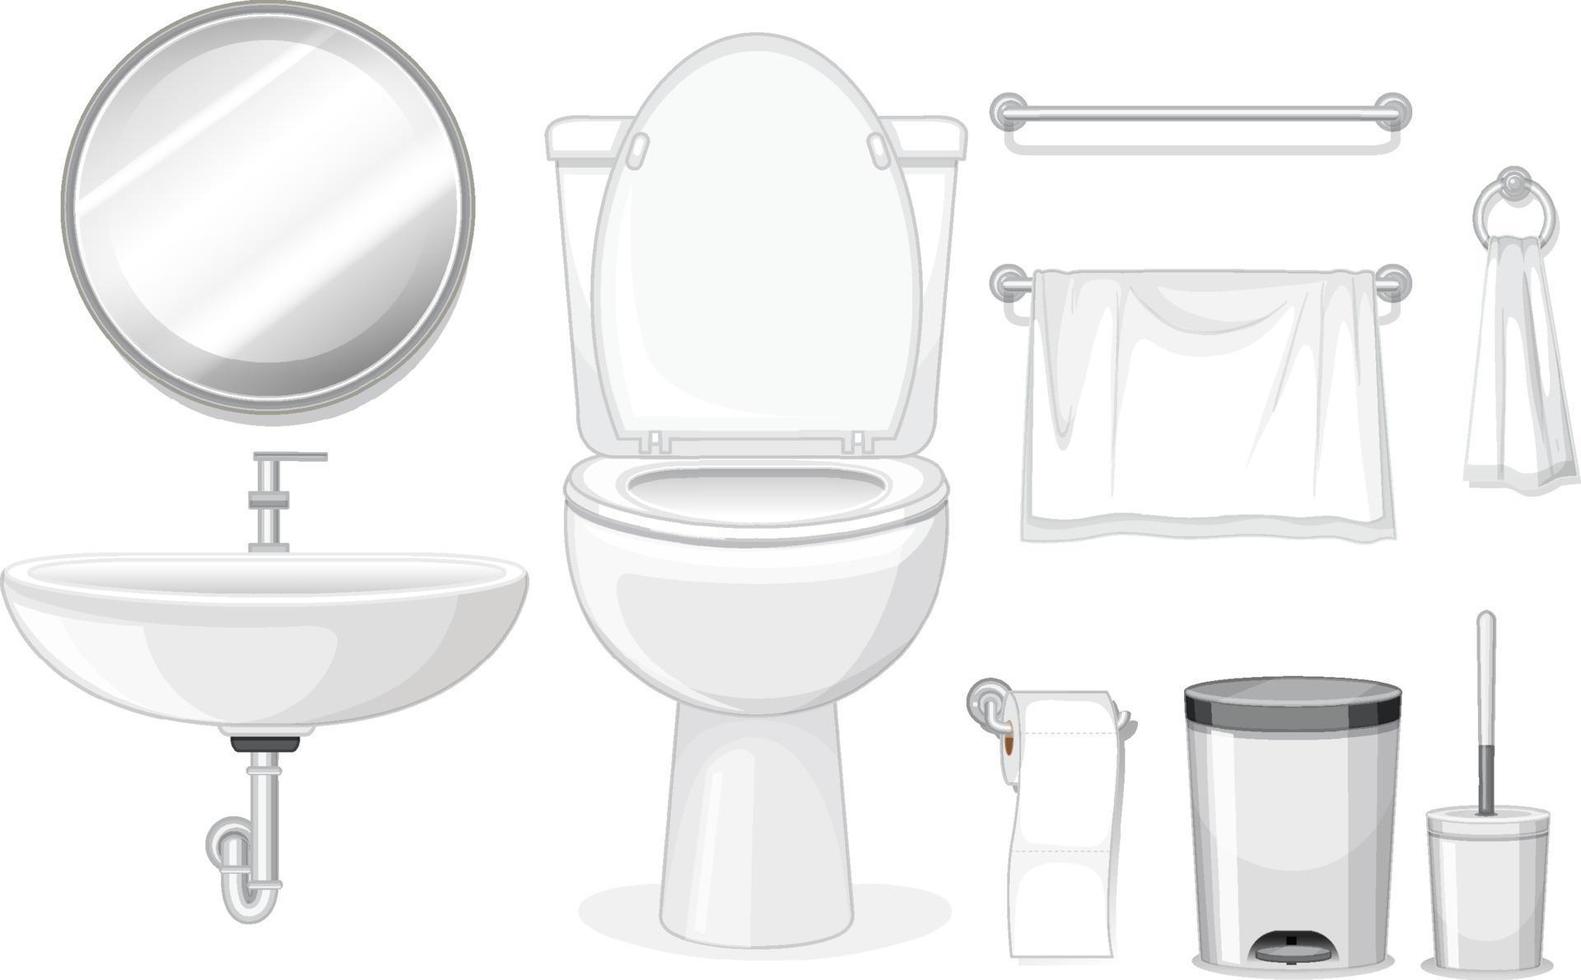 Sanitary wares on white background vector